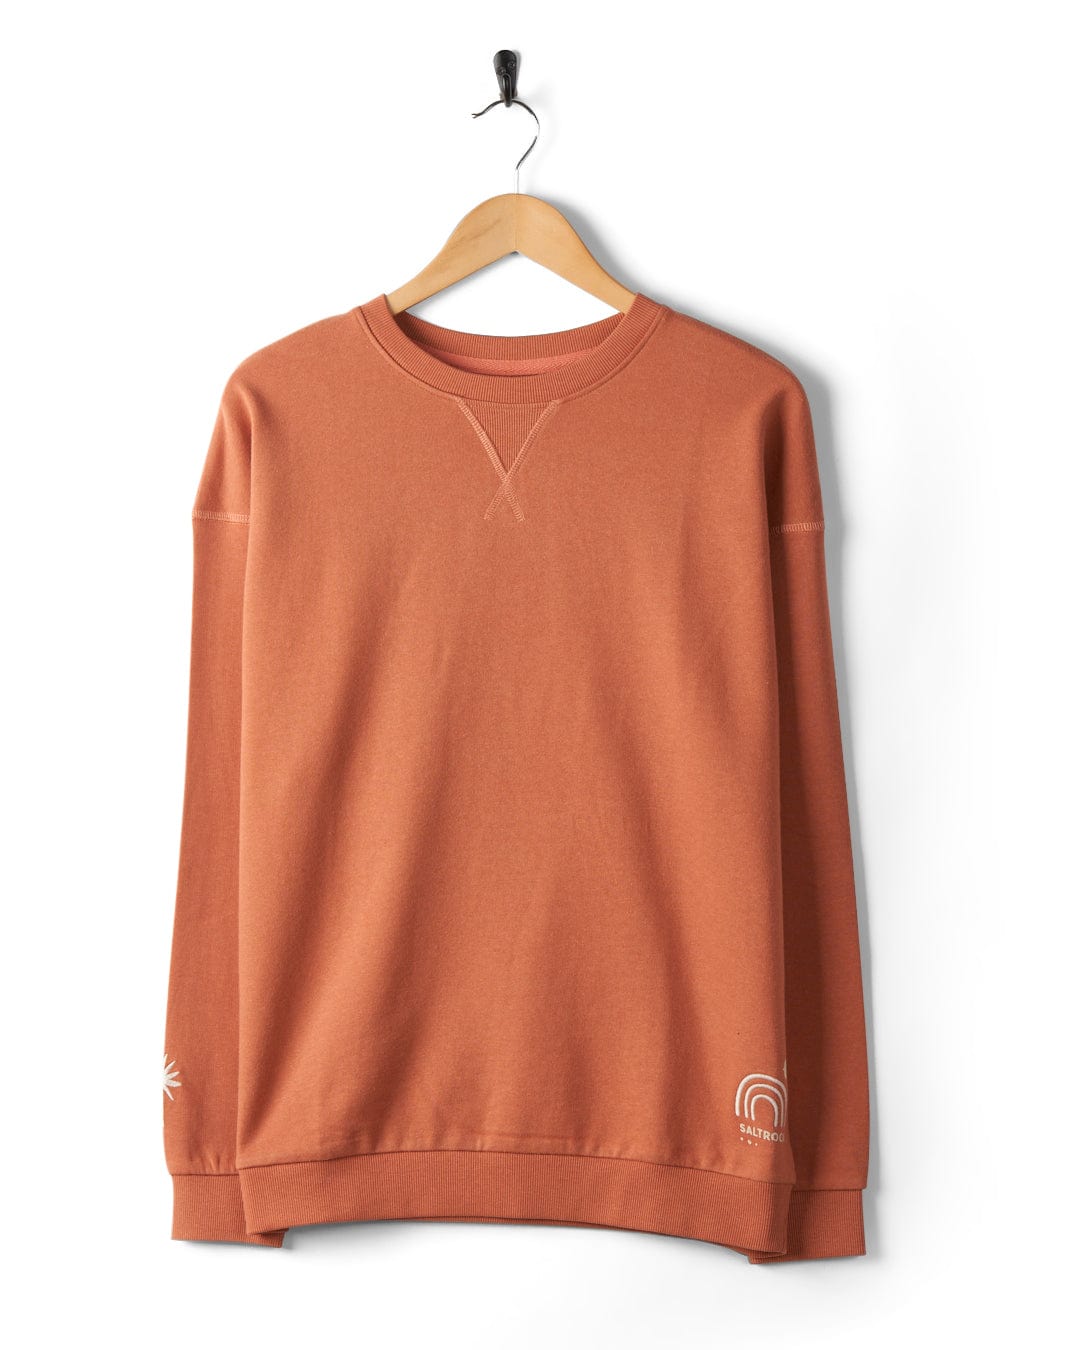 A Journey - Womens Sweatshirt - Peach, made from 100% cotton with a relaxed fit, hangs on a wooden hanger against a white background. It features delicate embroidered graphics near the left wrist and bottom right hem.